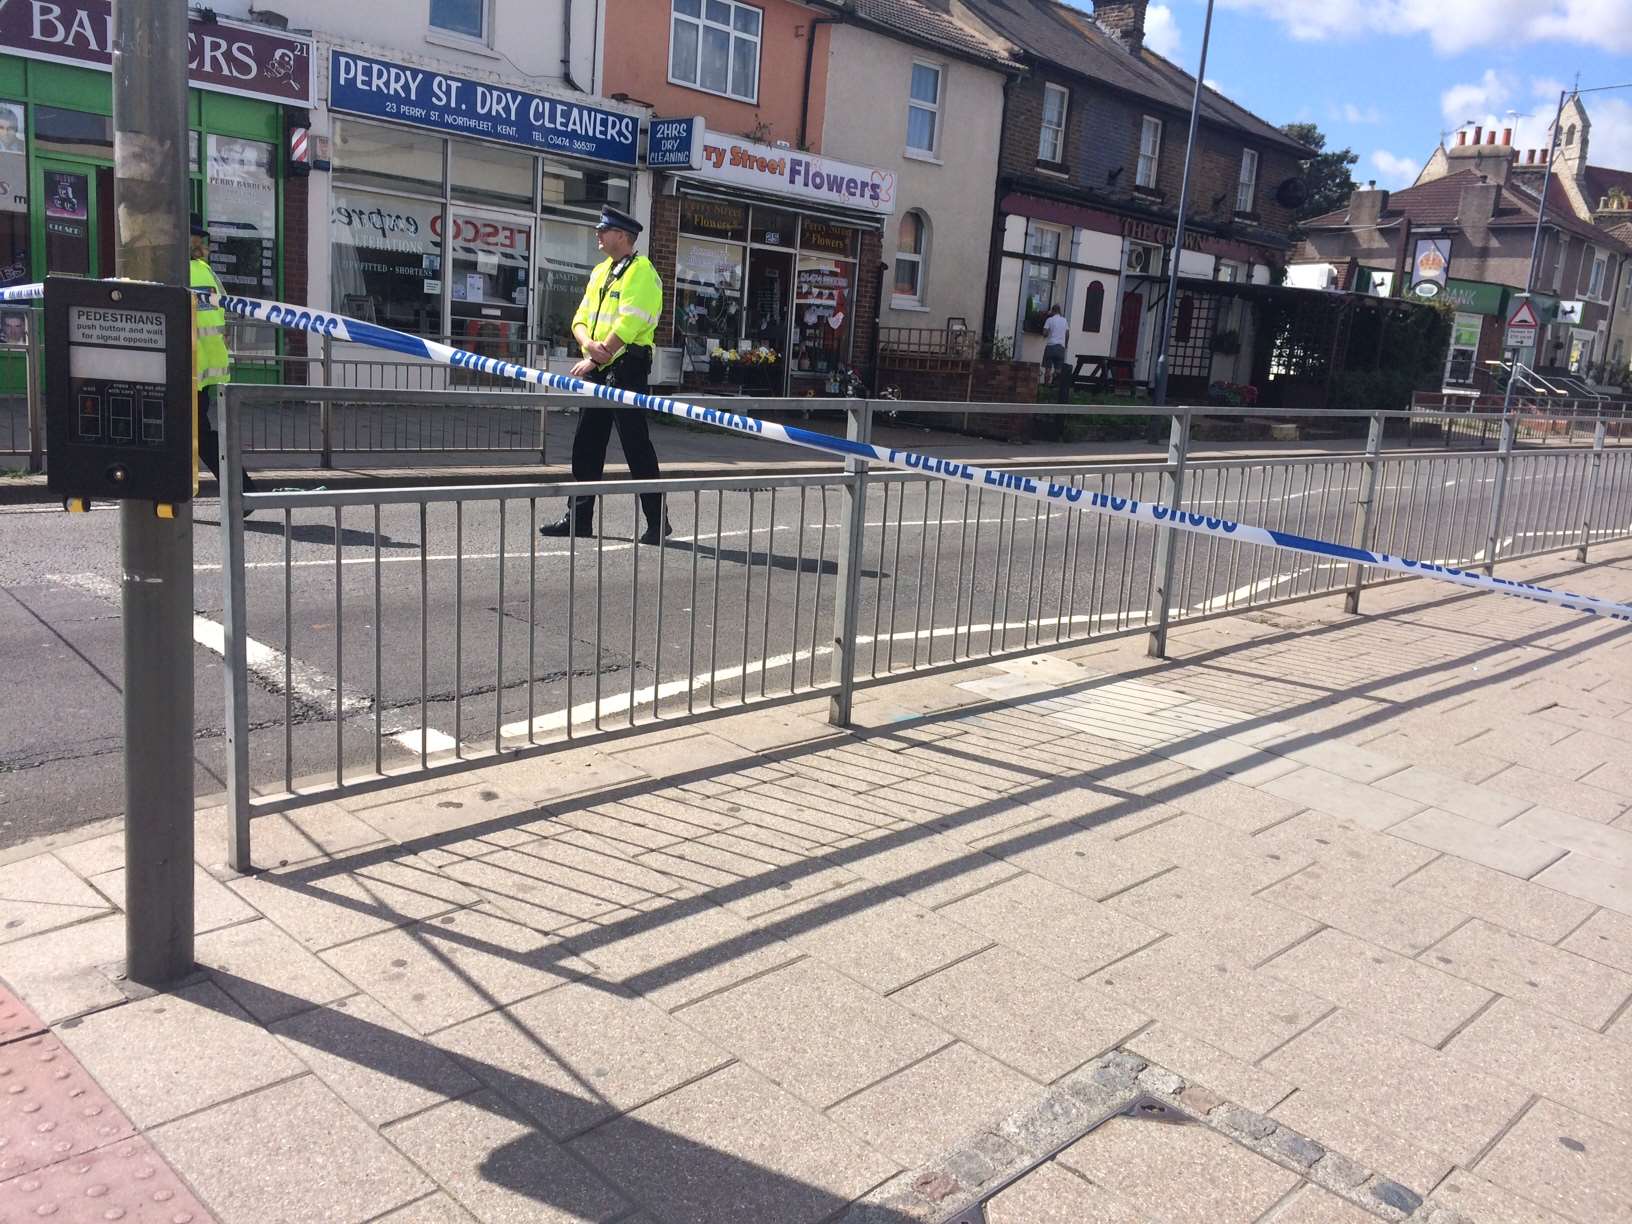 A police cordon in Perry Street, Northfleet, after the fatality